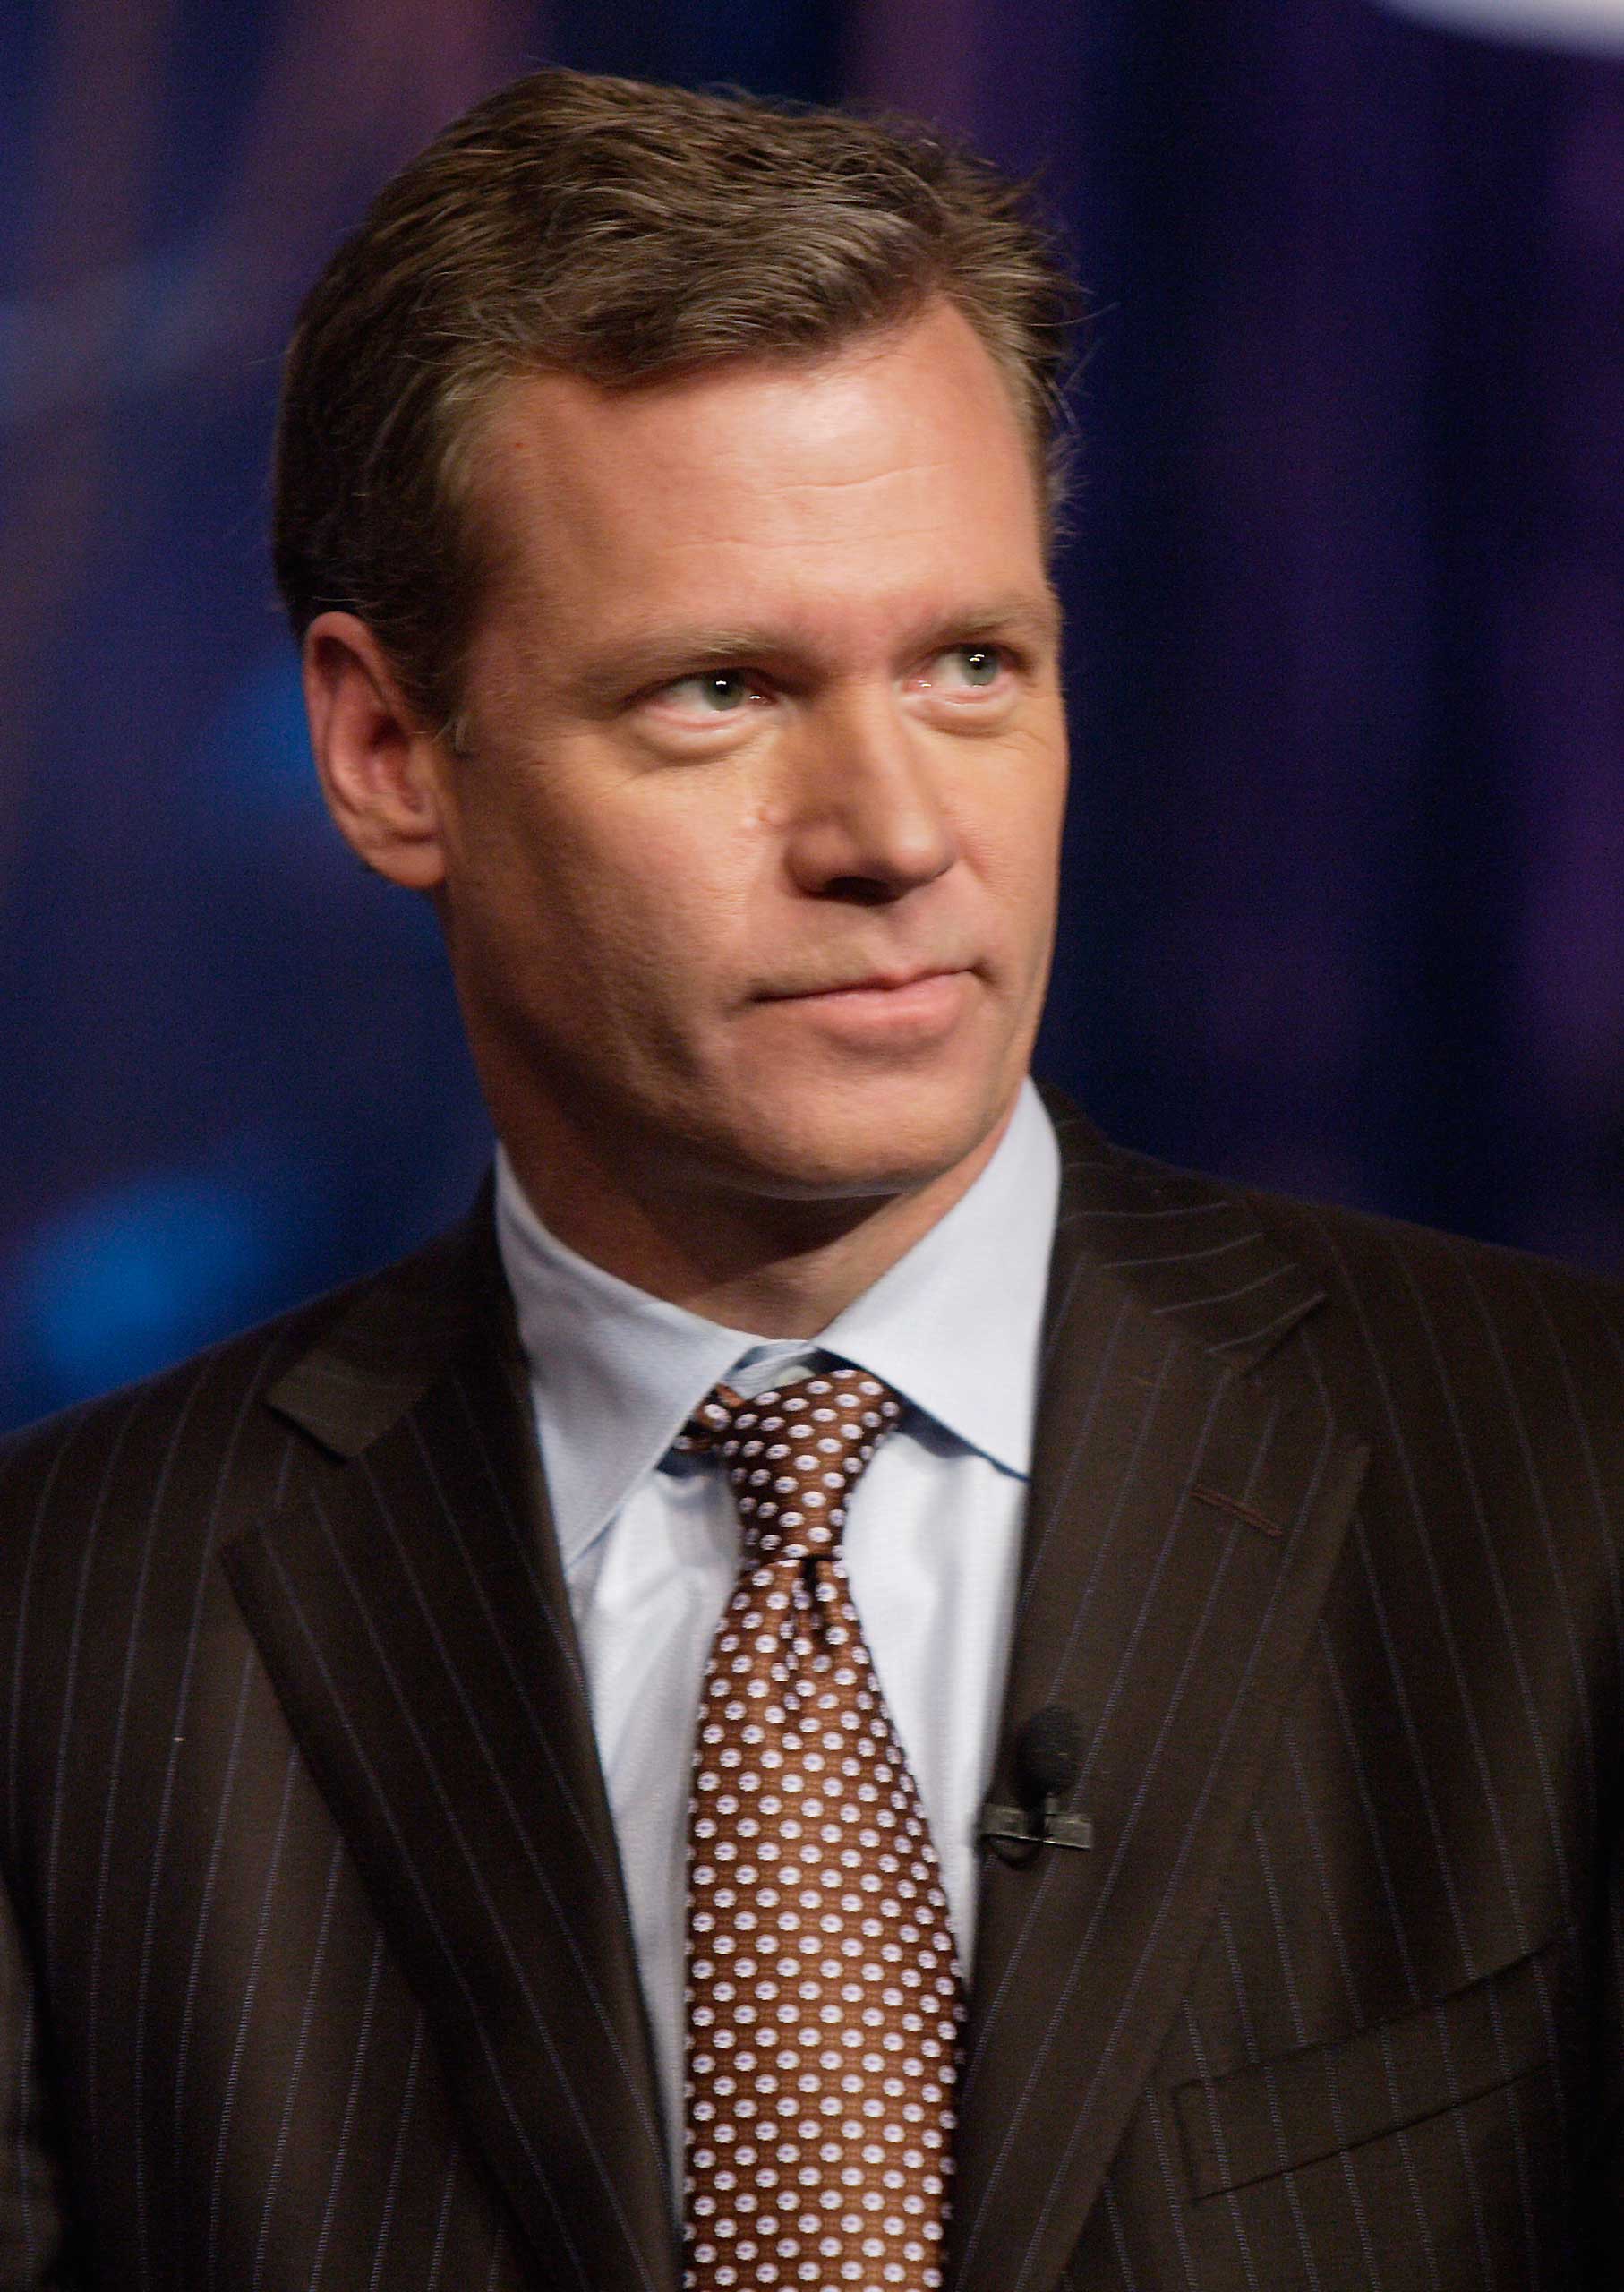 Chris Hansen in 2007. (Paul Drinkwater—NBC/NBCU Photo Bank/Getty Images)